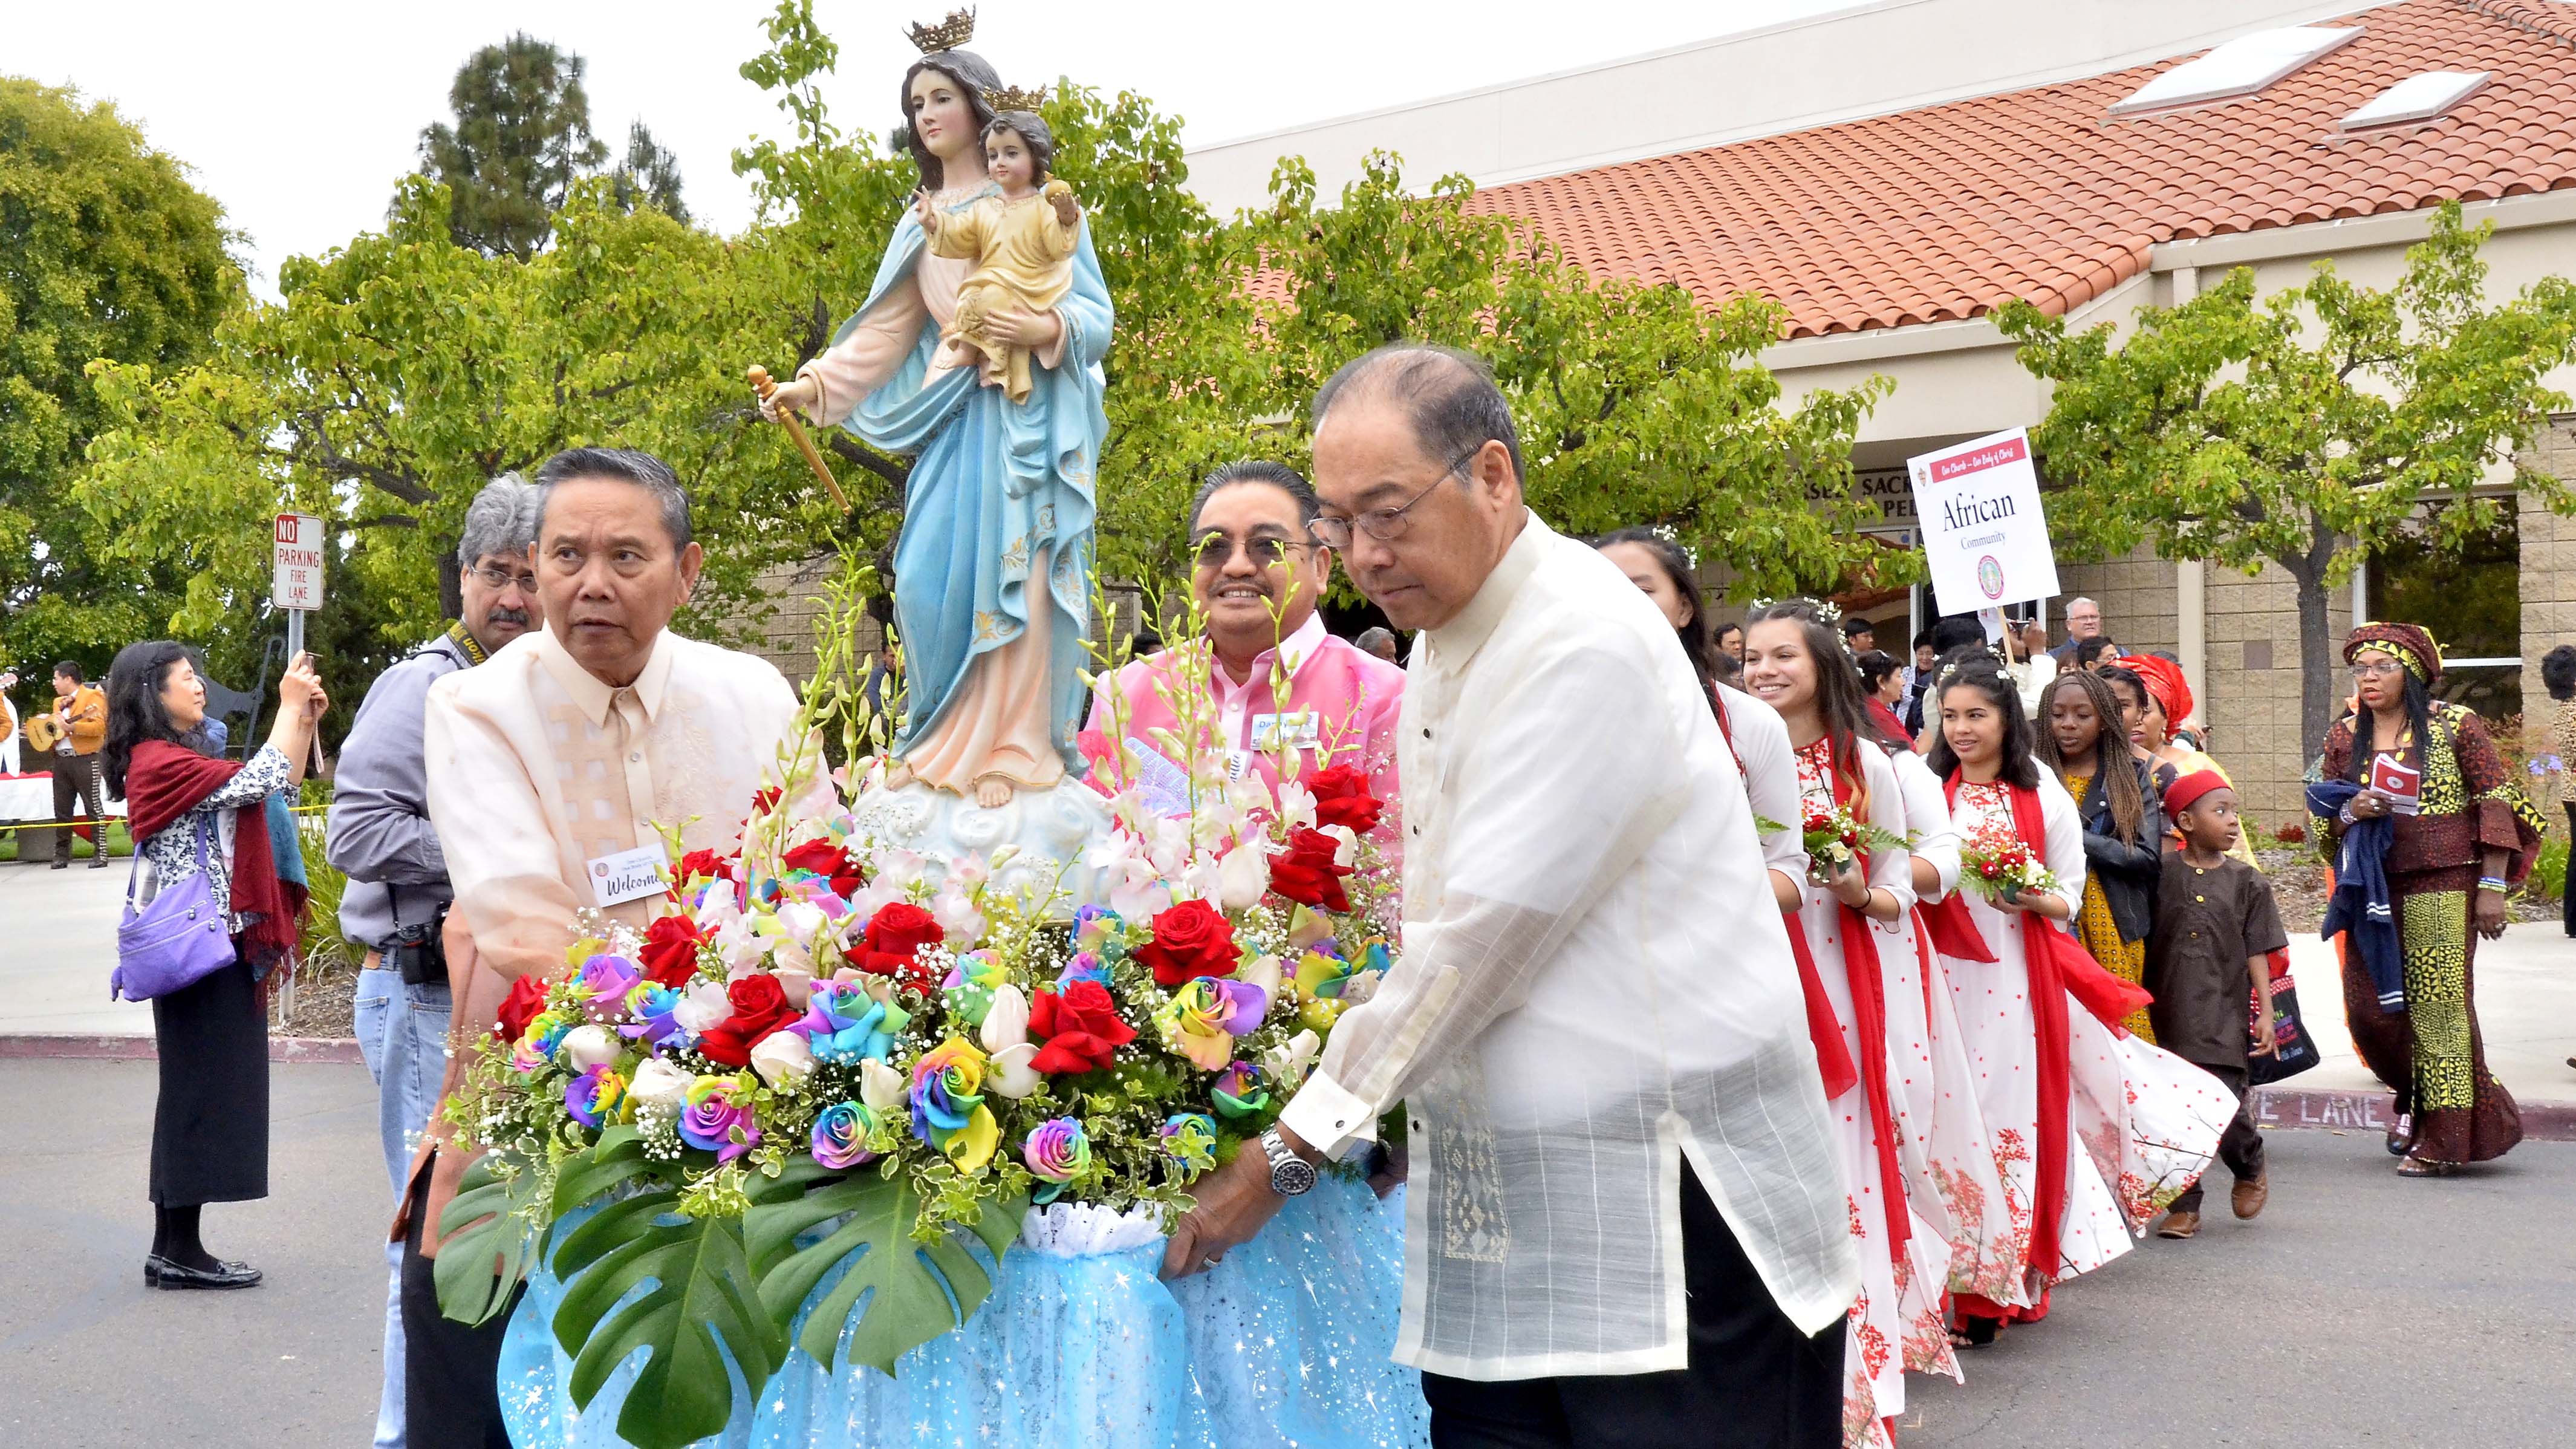 A statue of Mary is wheeled to the festival after Mass.